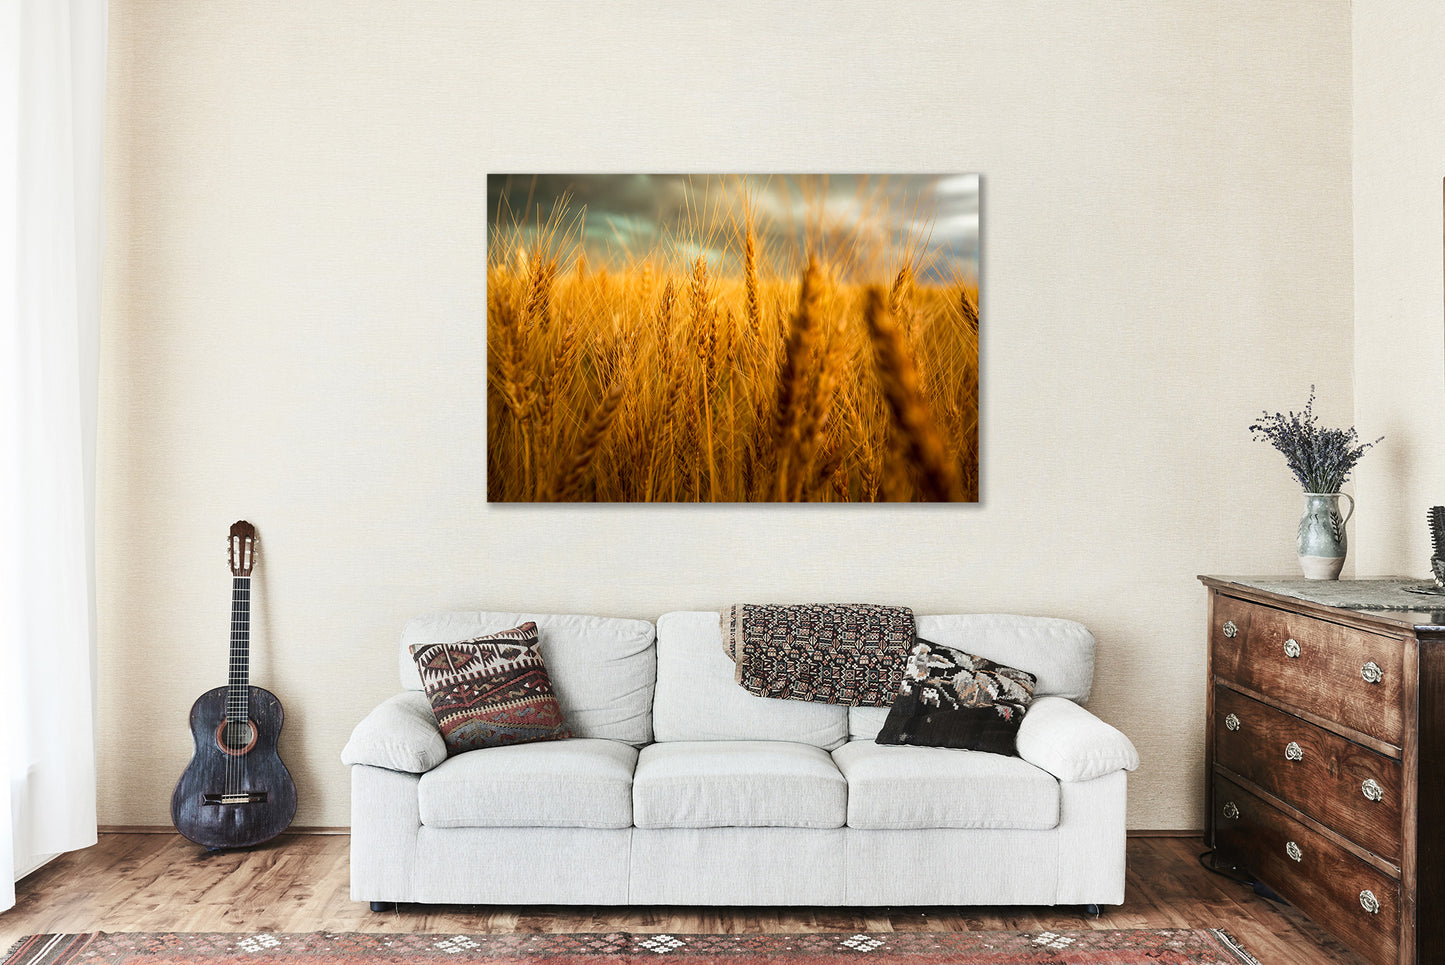 Country Metal Print (Ready to Hang) Photo on Aluminum of Golden Stalks in Wheat Field at Harvest Time in Colorado Farm Wall Art Farmhouse Decor